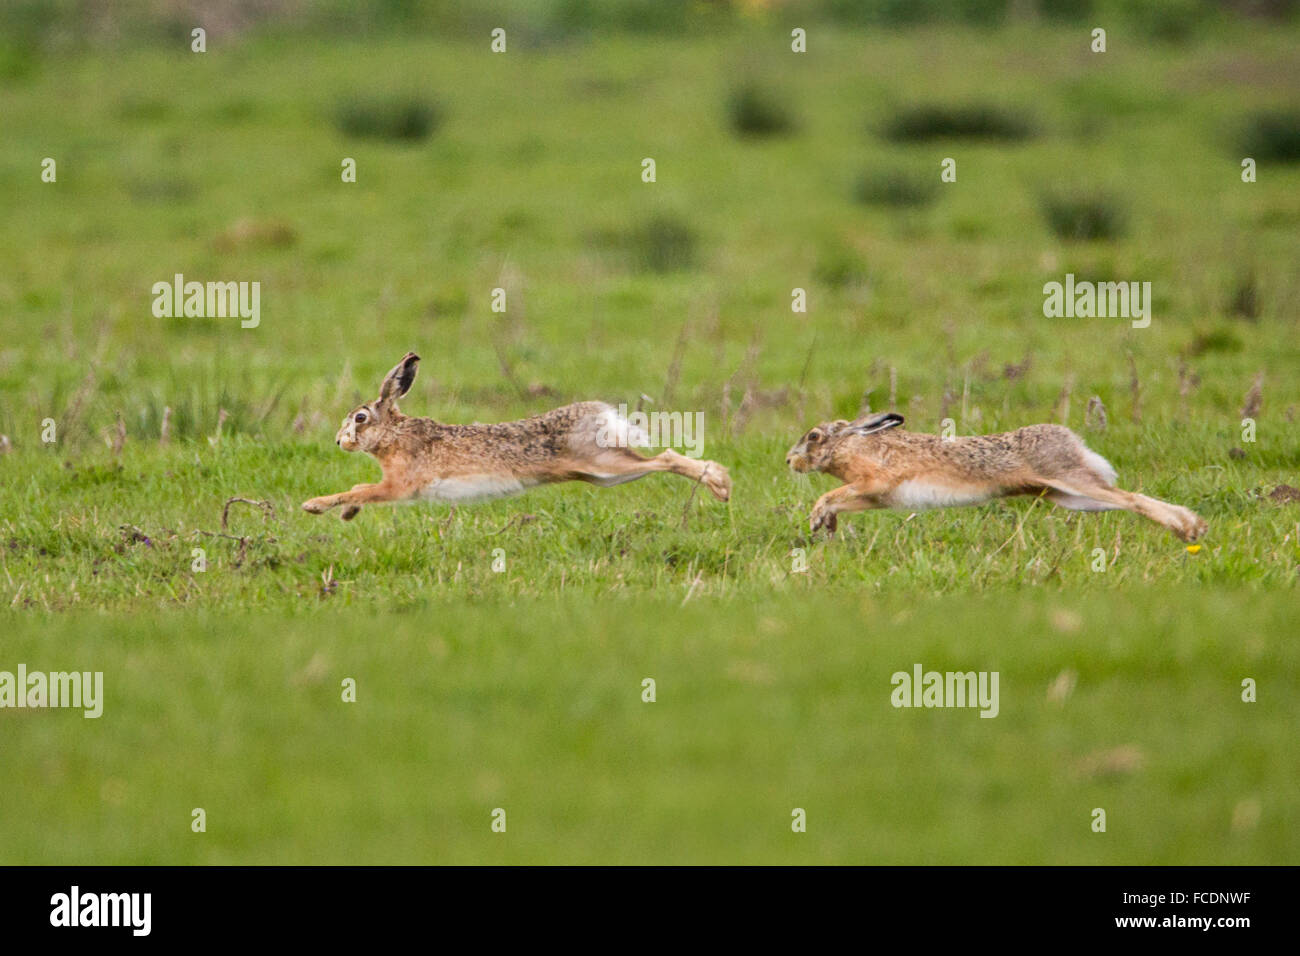 Netherlands, Montfoort, Male hares chasing each other Stock Photo